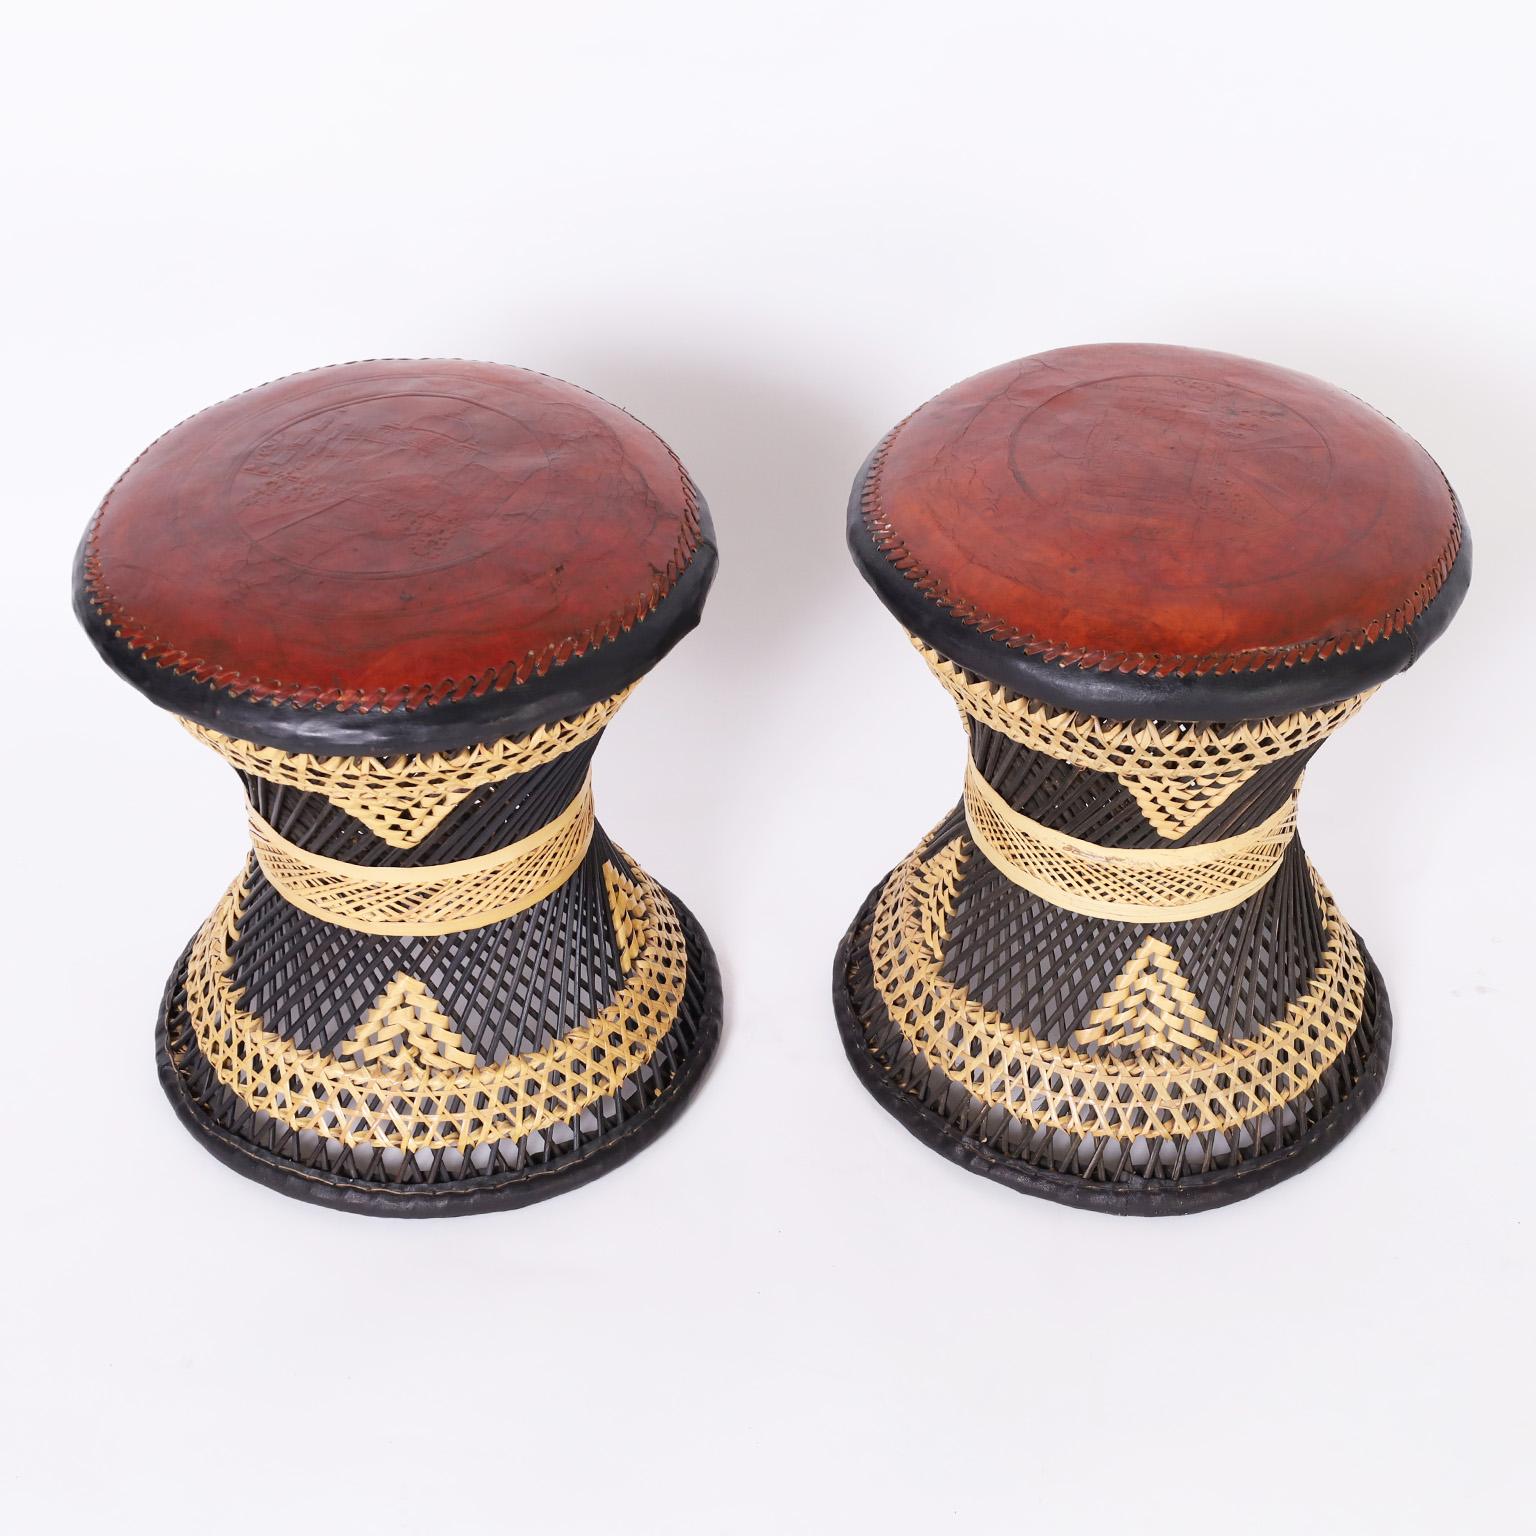 Impressive pair of mid century Anglo Indian stools or seats with leather tops featuring embossed images of the Taj Mahal on classic hourglass form wicker bases paint decorated in black.